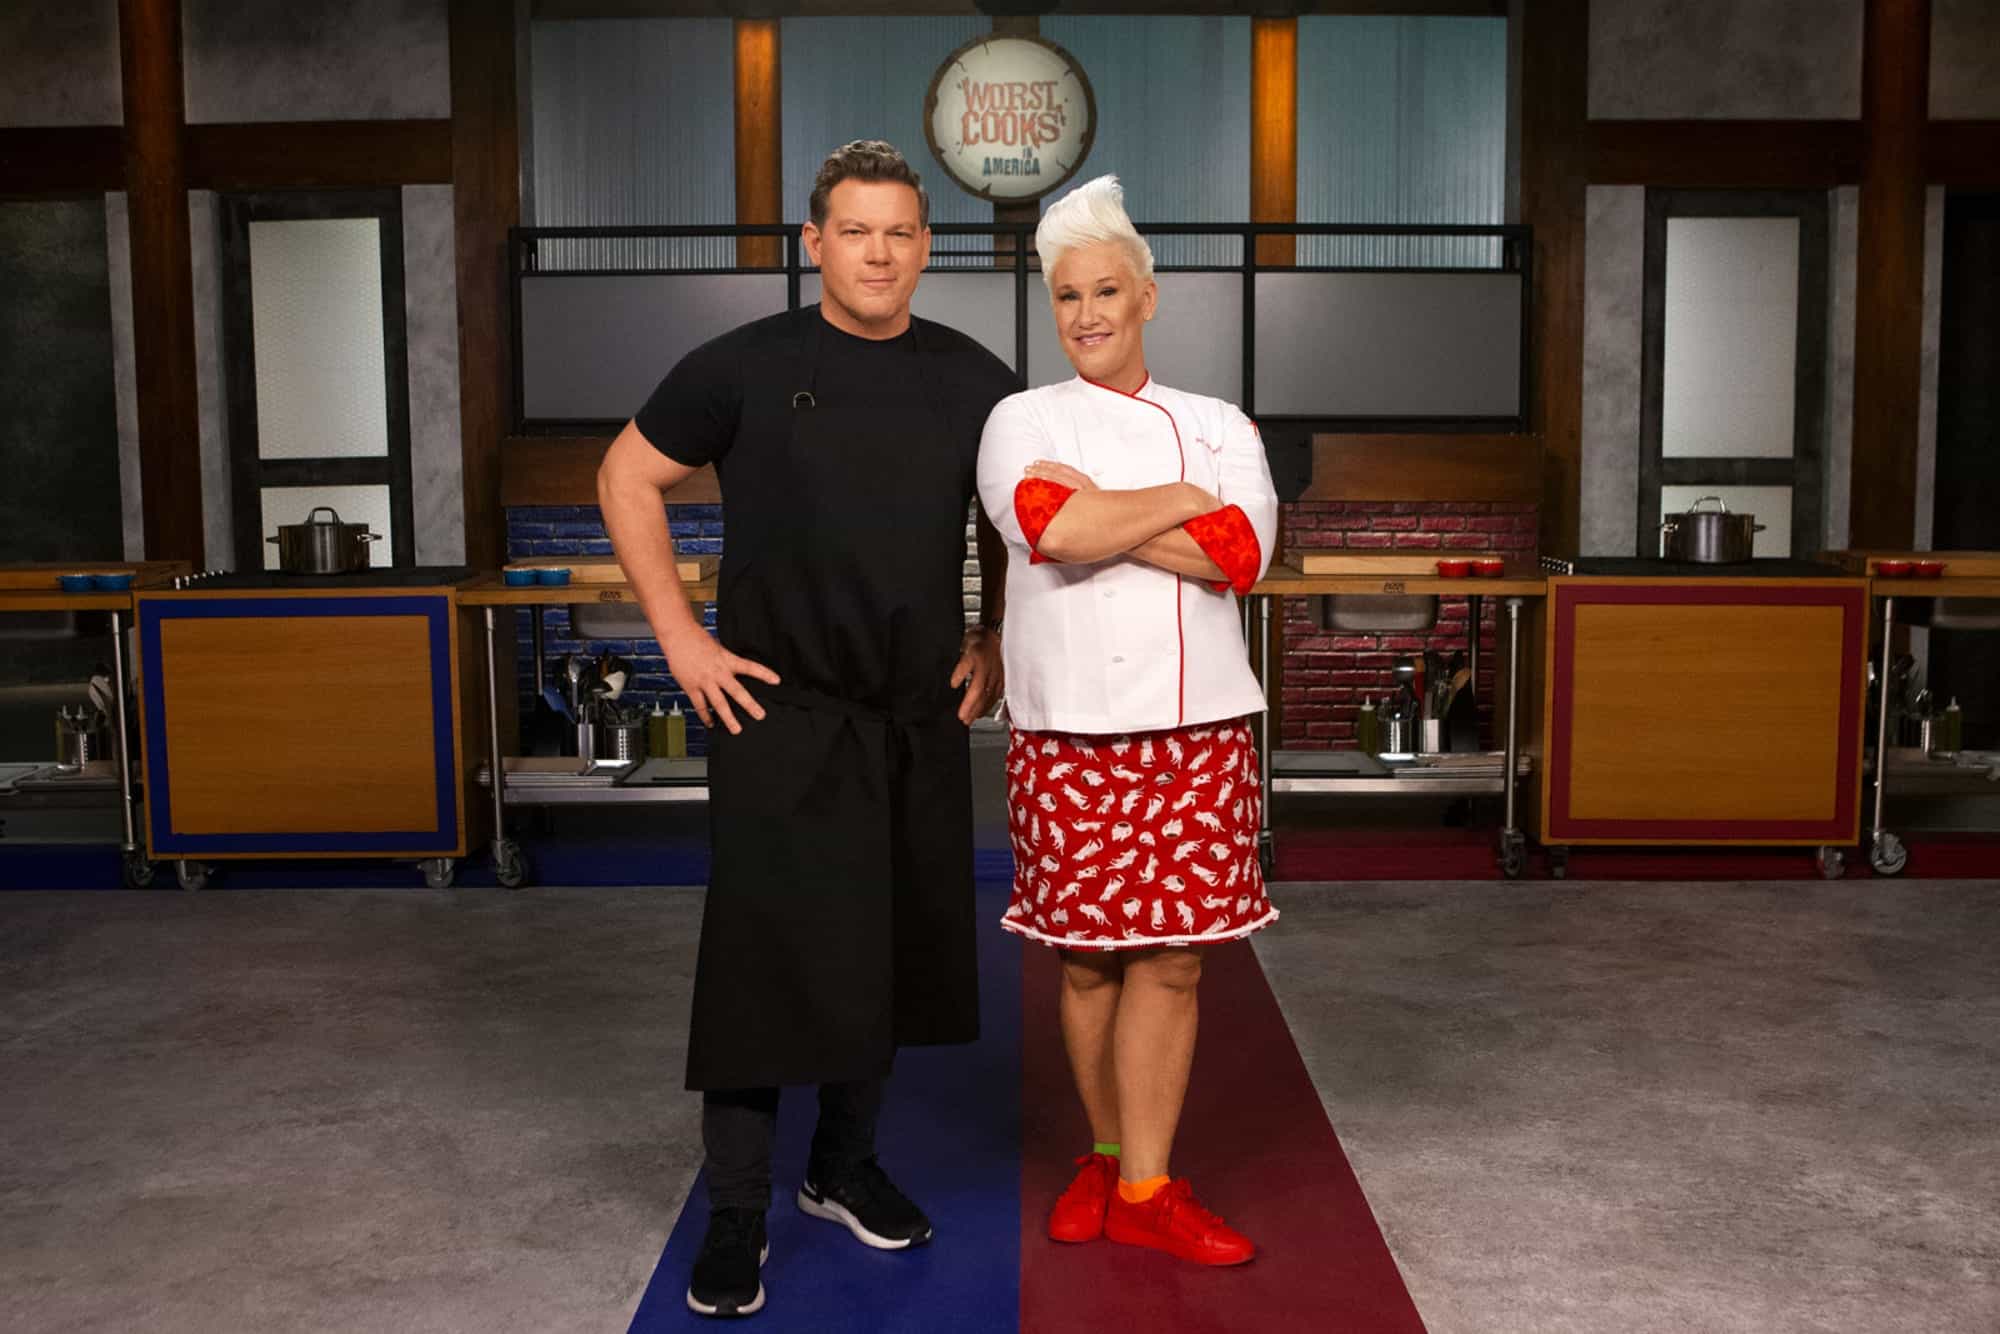 The two chefs, Anne Burrell and Beau MacMillan, on the show, Worst Cooks in America (Credits: Food Network)